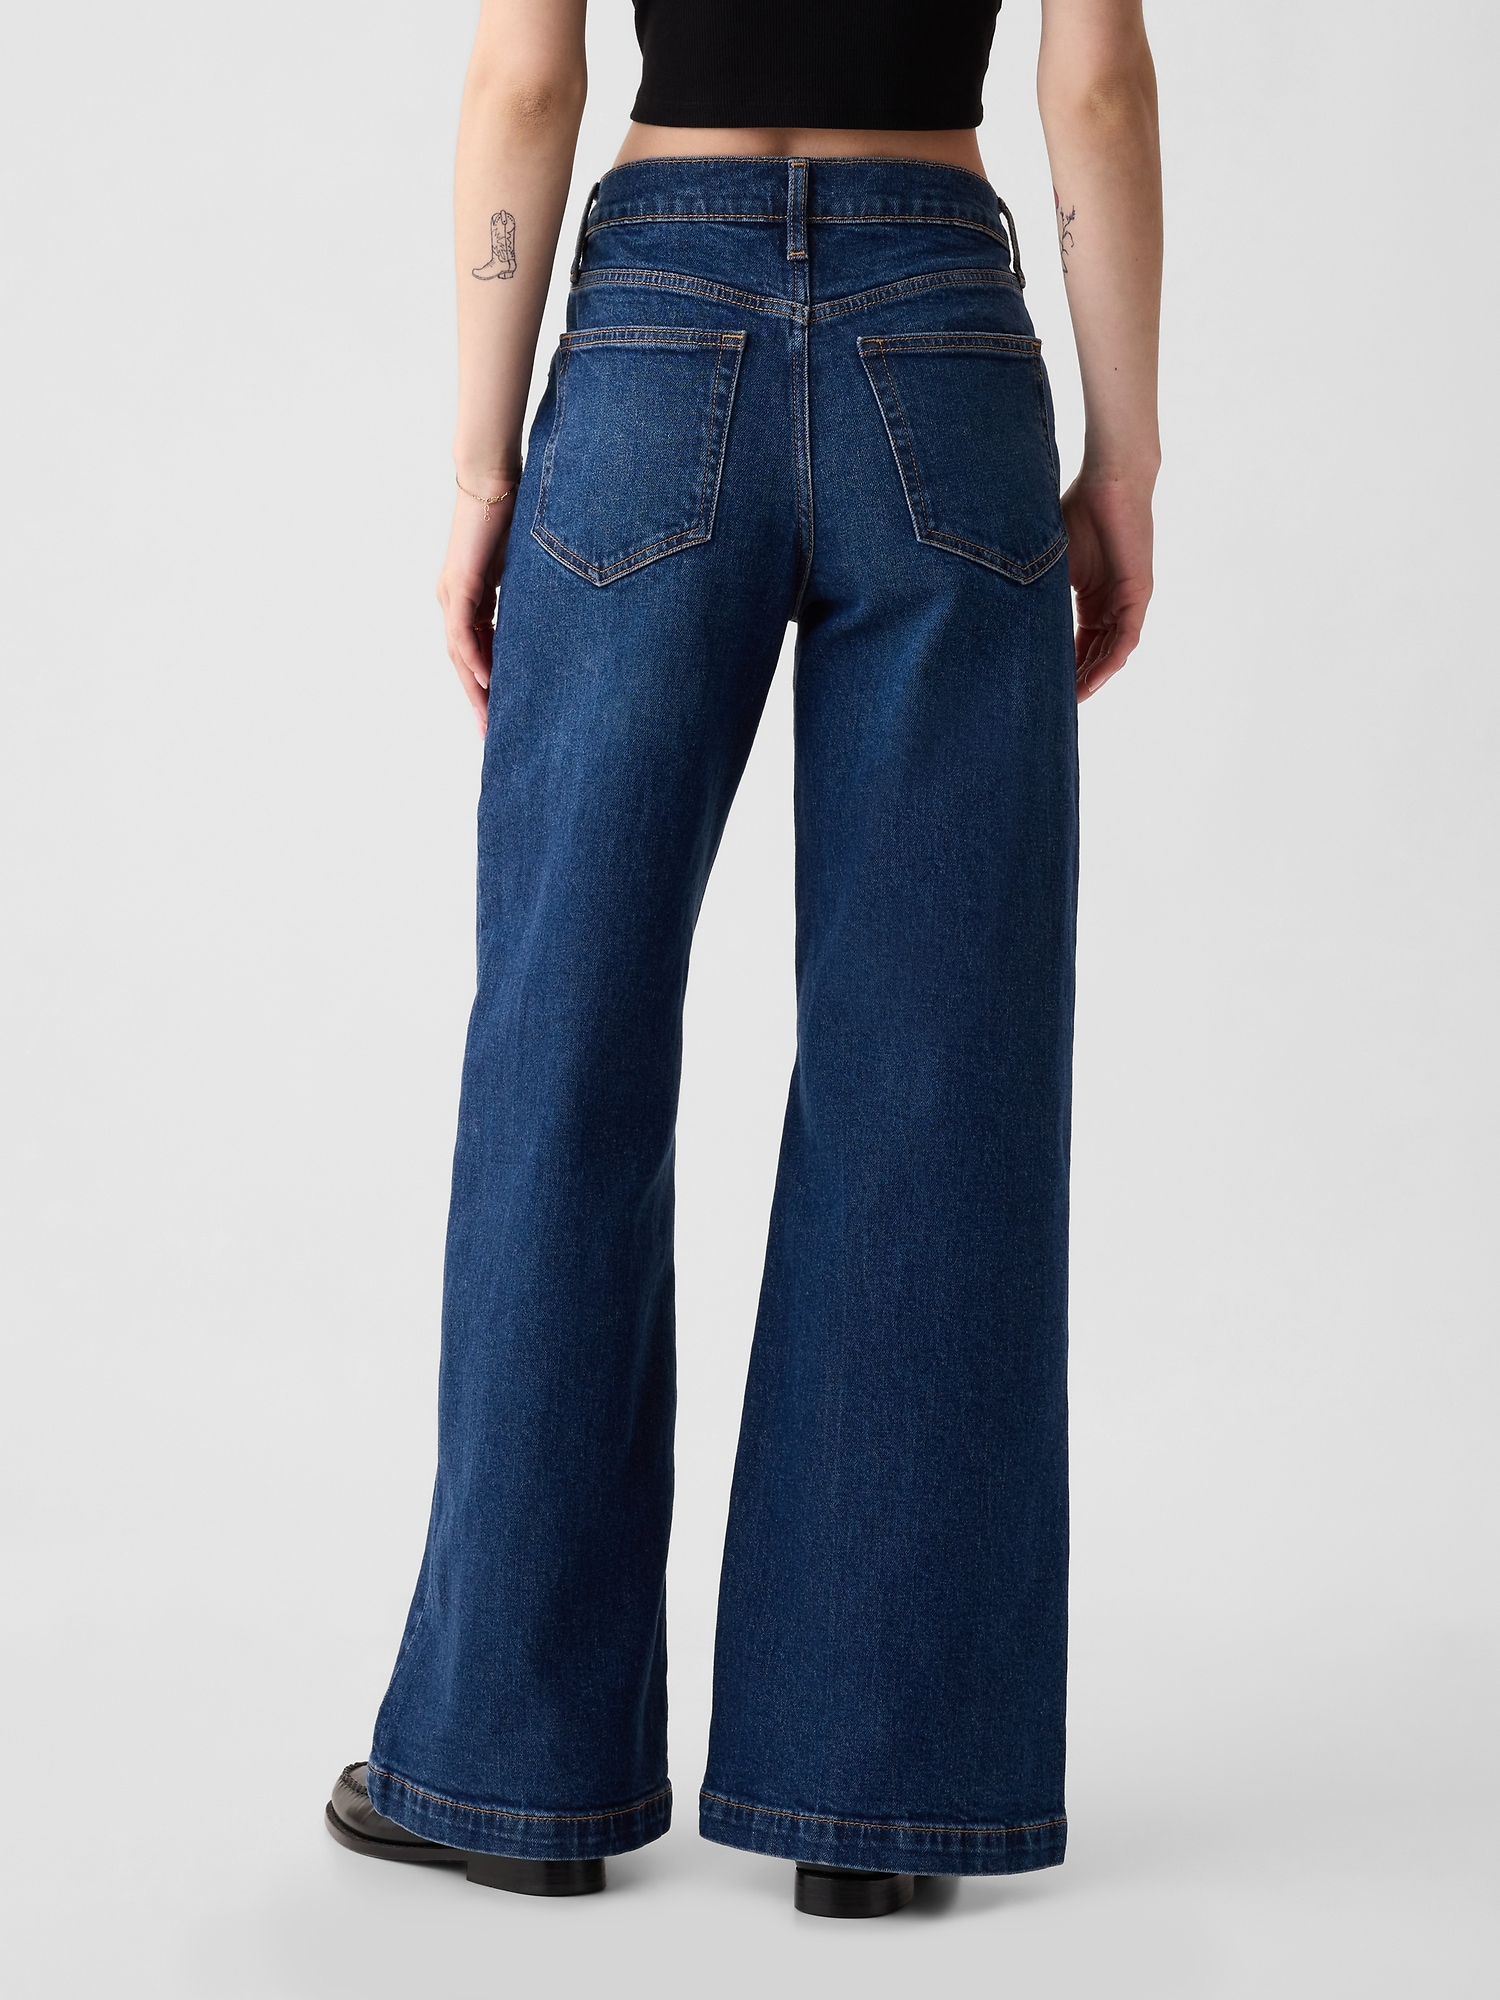 1166 Women's Super High Waisted Skinny Jeans